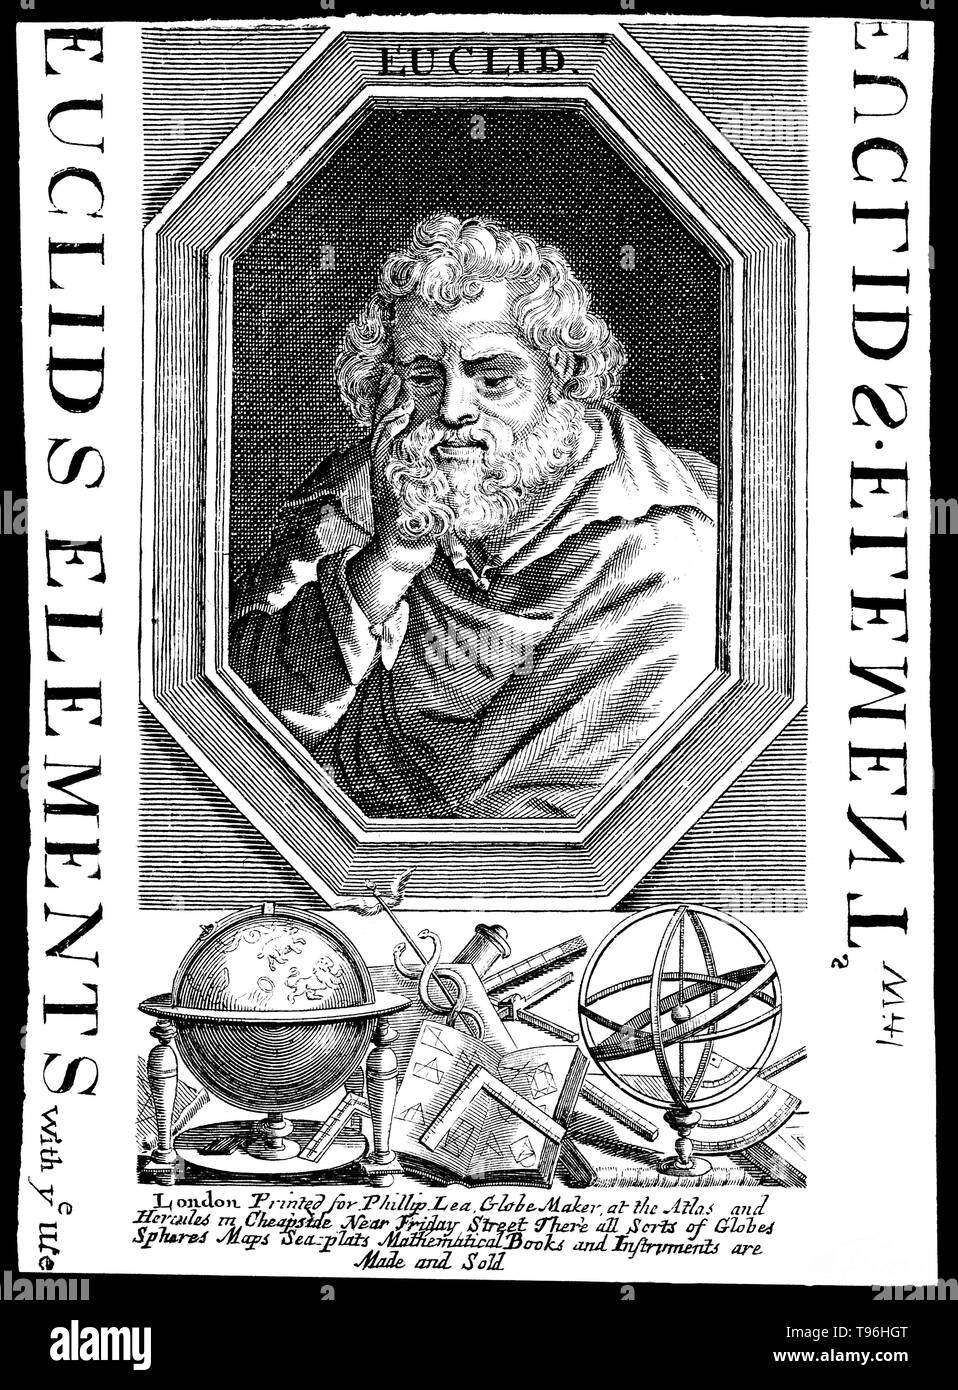 Euclid Meaning Good Glory 300 Was An Ancient Greek Mathematician Often Referred To As The Father Of Geometry Little Is Known About His Life The Date And Place Of Euclid S Birth